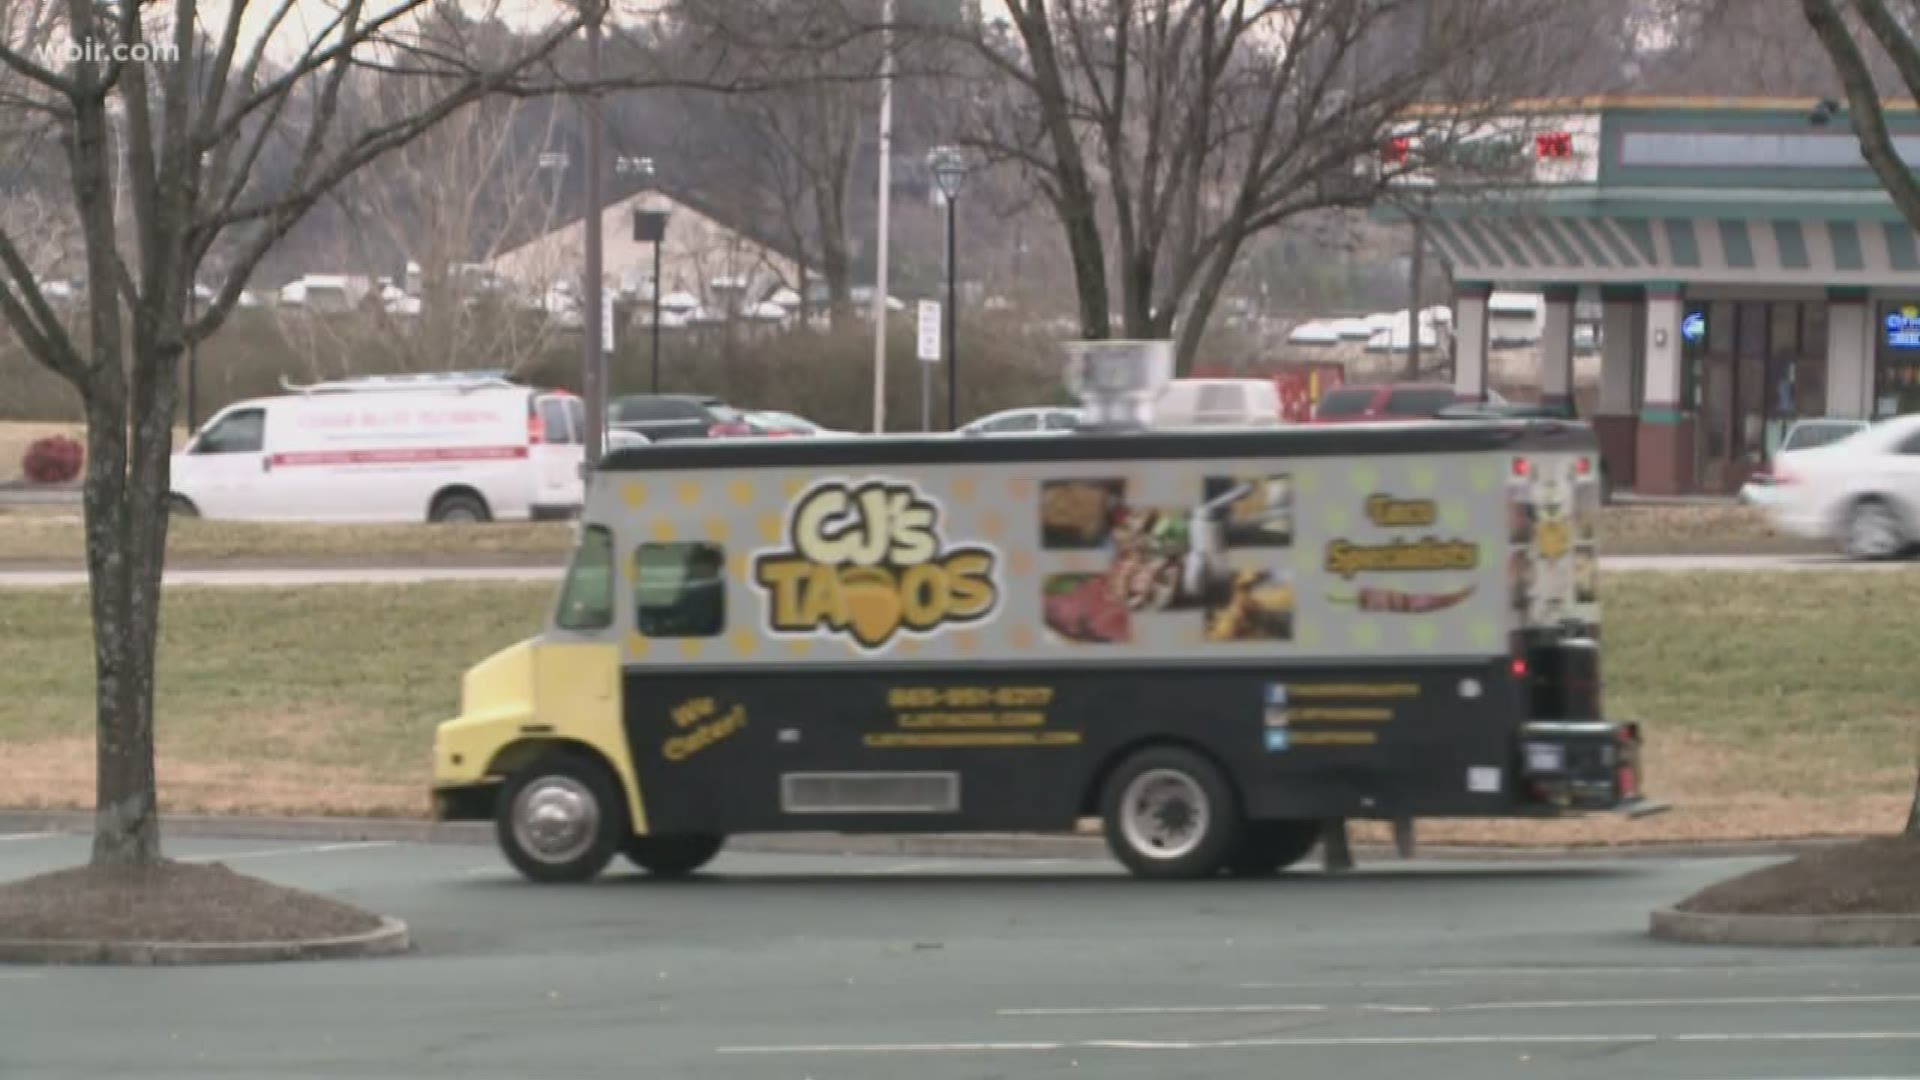 The food truck serves a variety of different tacos and travels around Knoxville, serving people at several different locations.